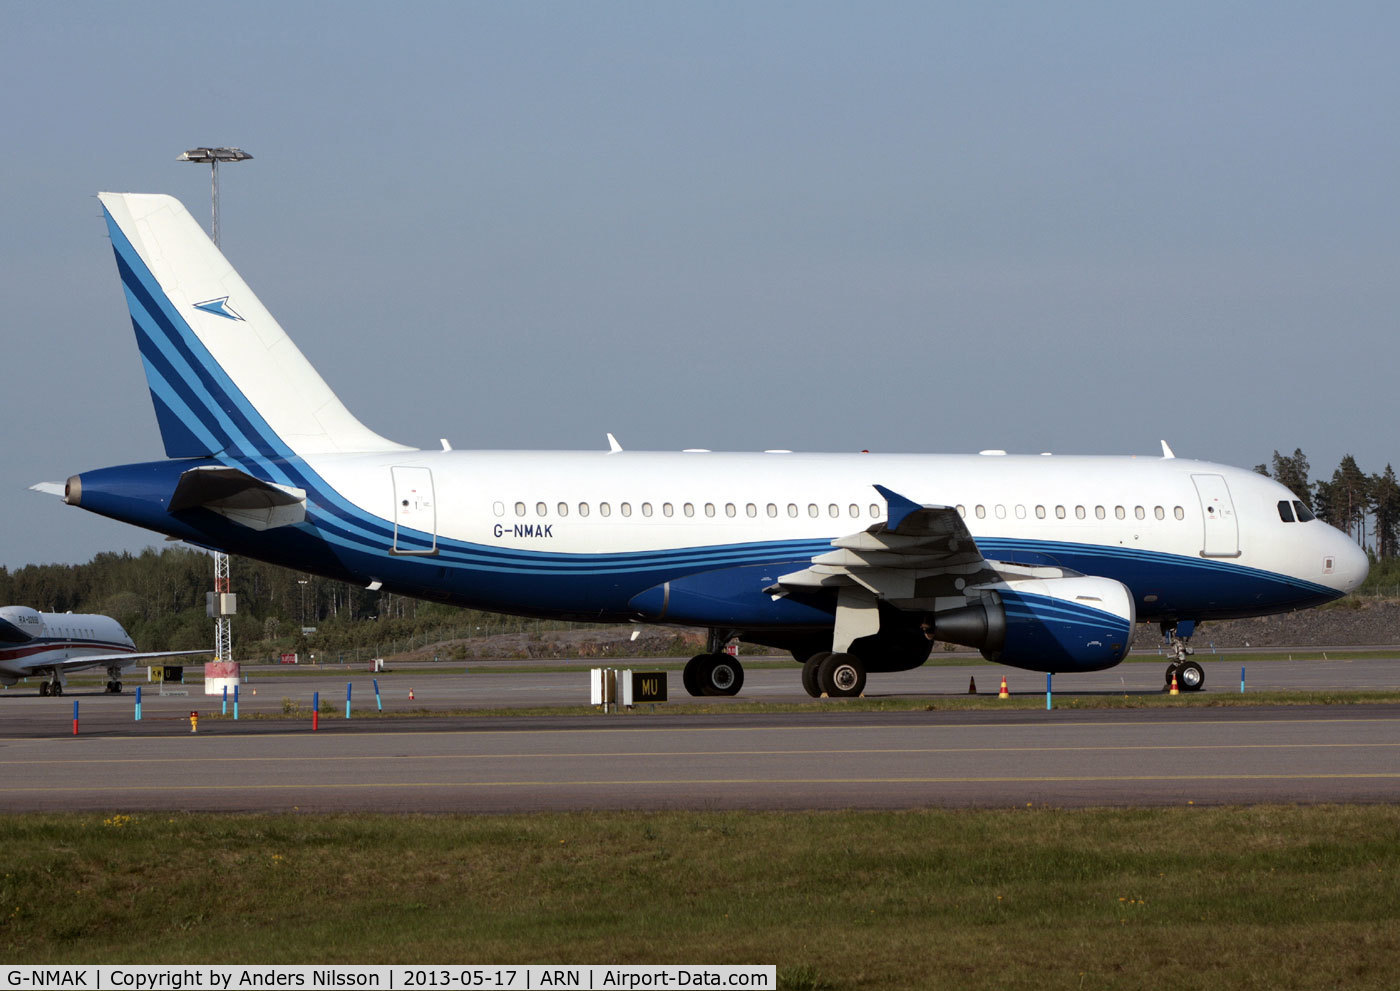 G-NMAK, 2005 Airbus A319-115 C/N 2550, Parked at stand M9.